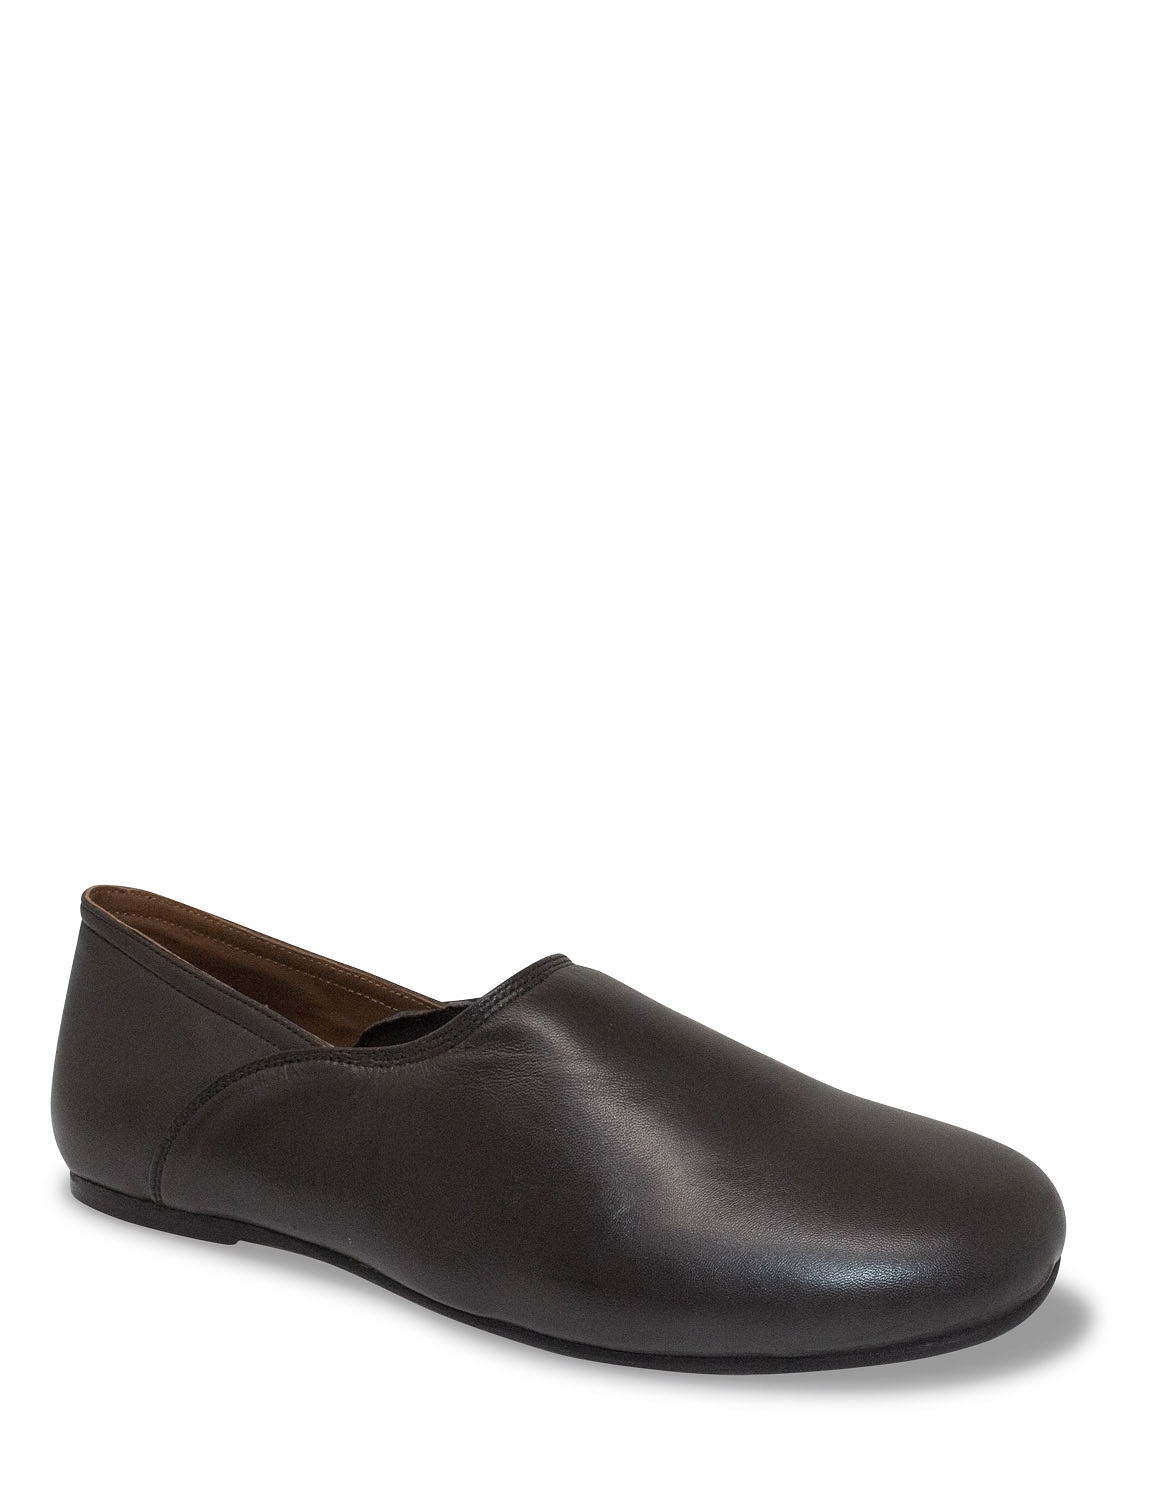 Leather Grecian Slipper With Leather Sole | Chums